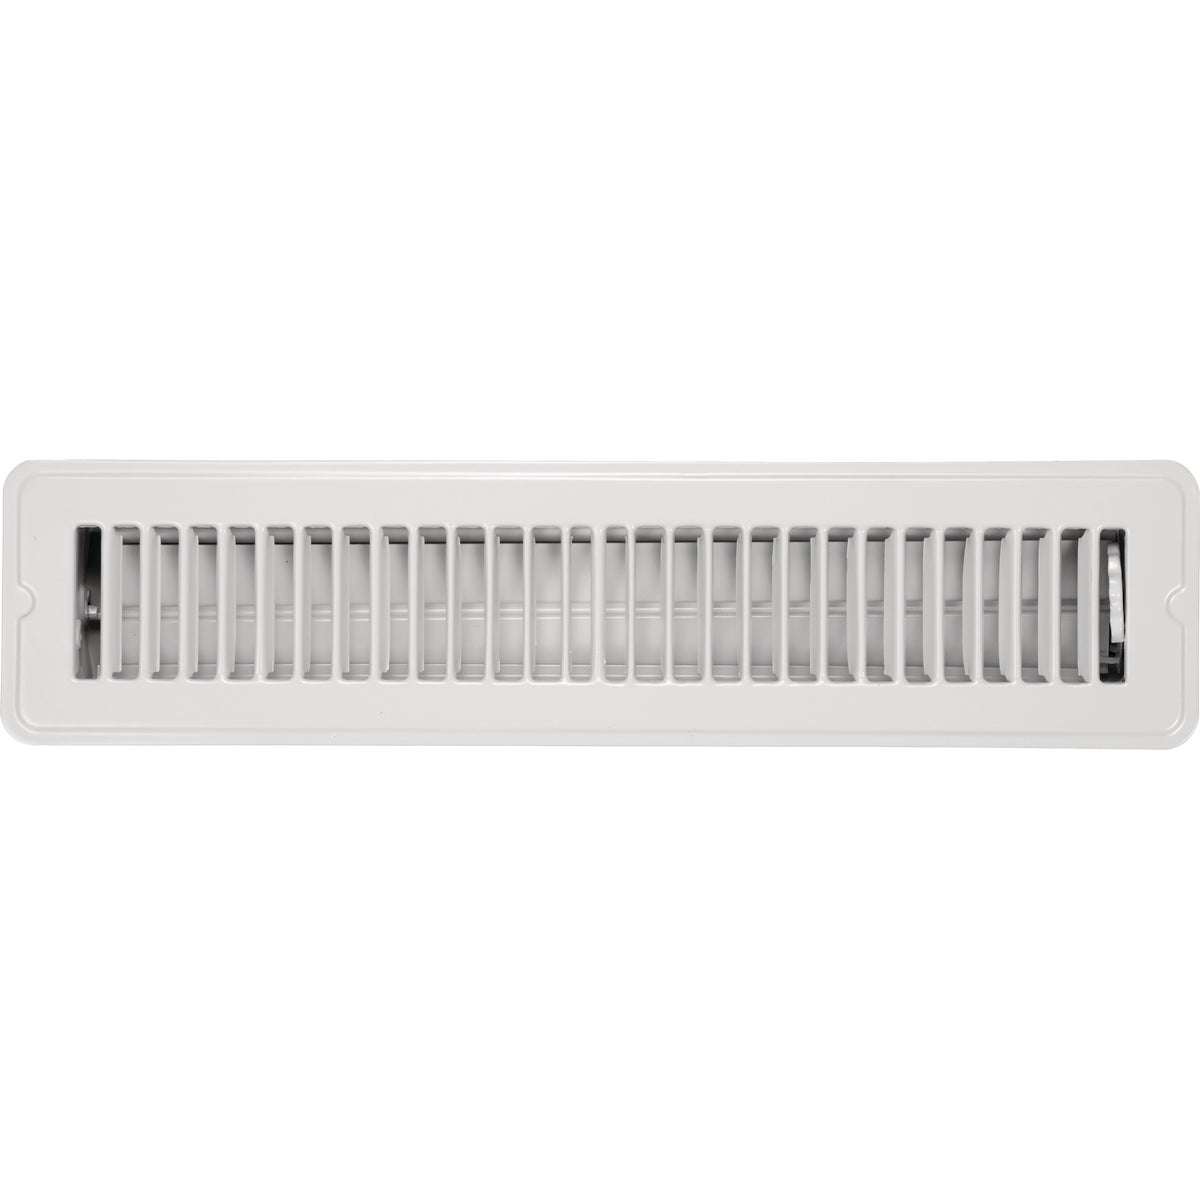 Home Impressions 2-1/4 In. x 14 In. White Steel Floor Register